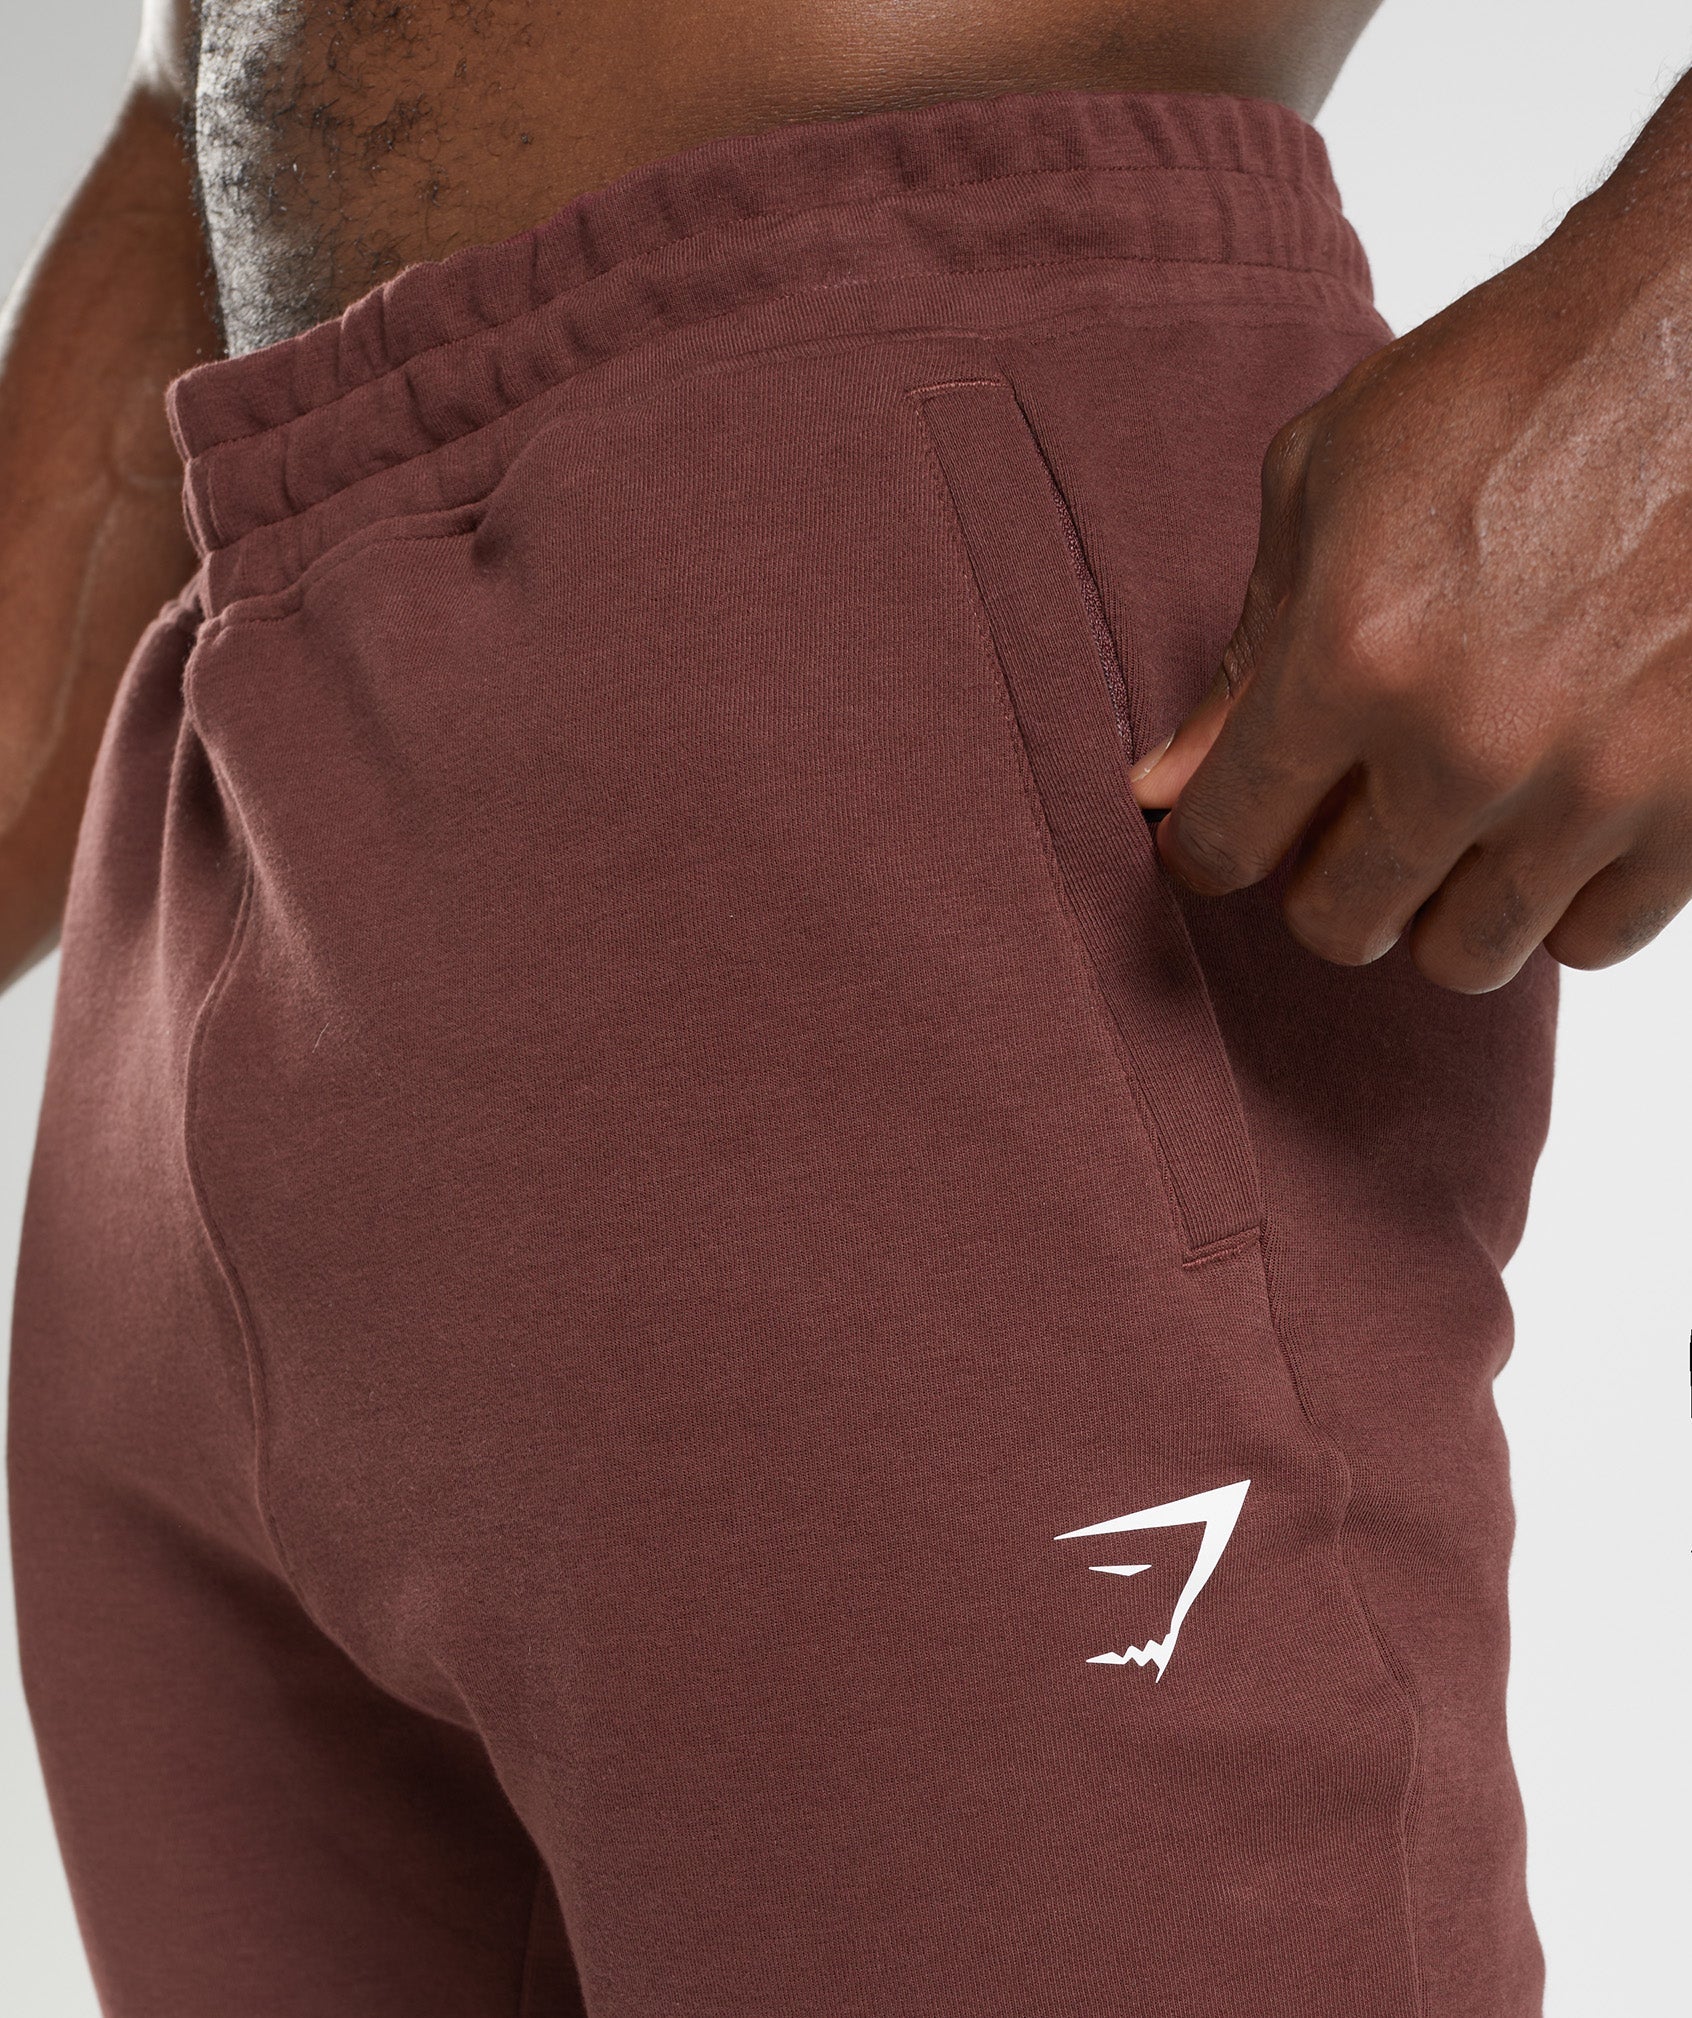 React Joggers in Cherry Brown - view 5